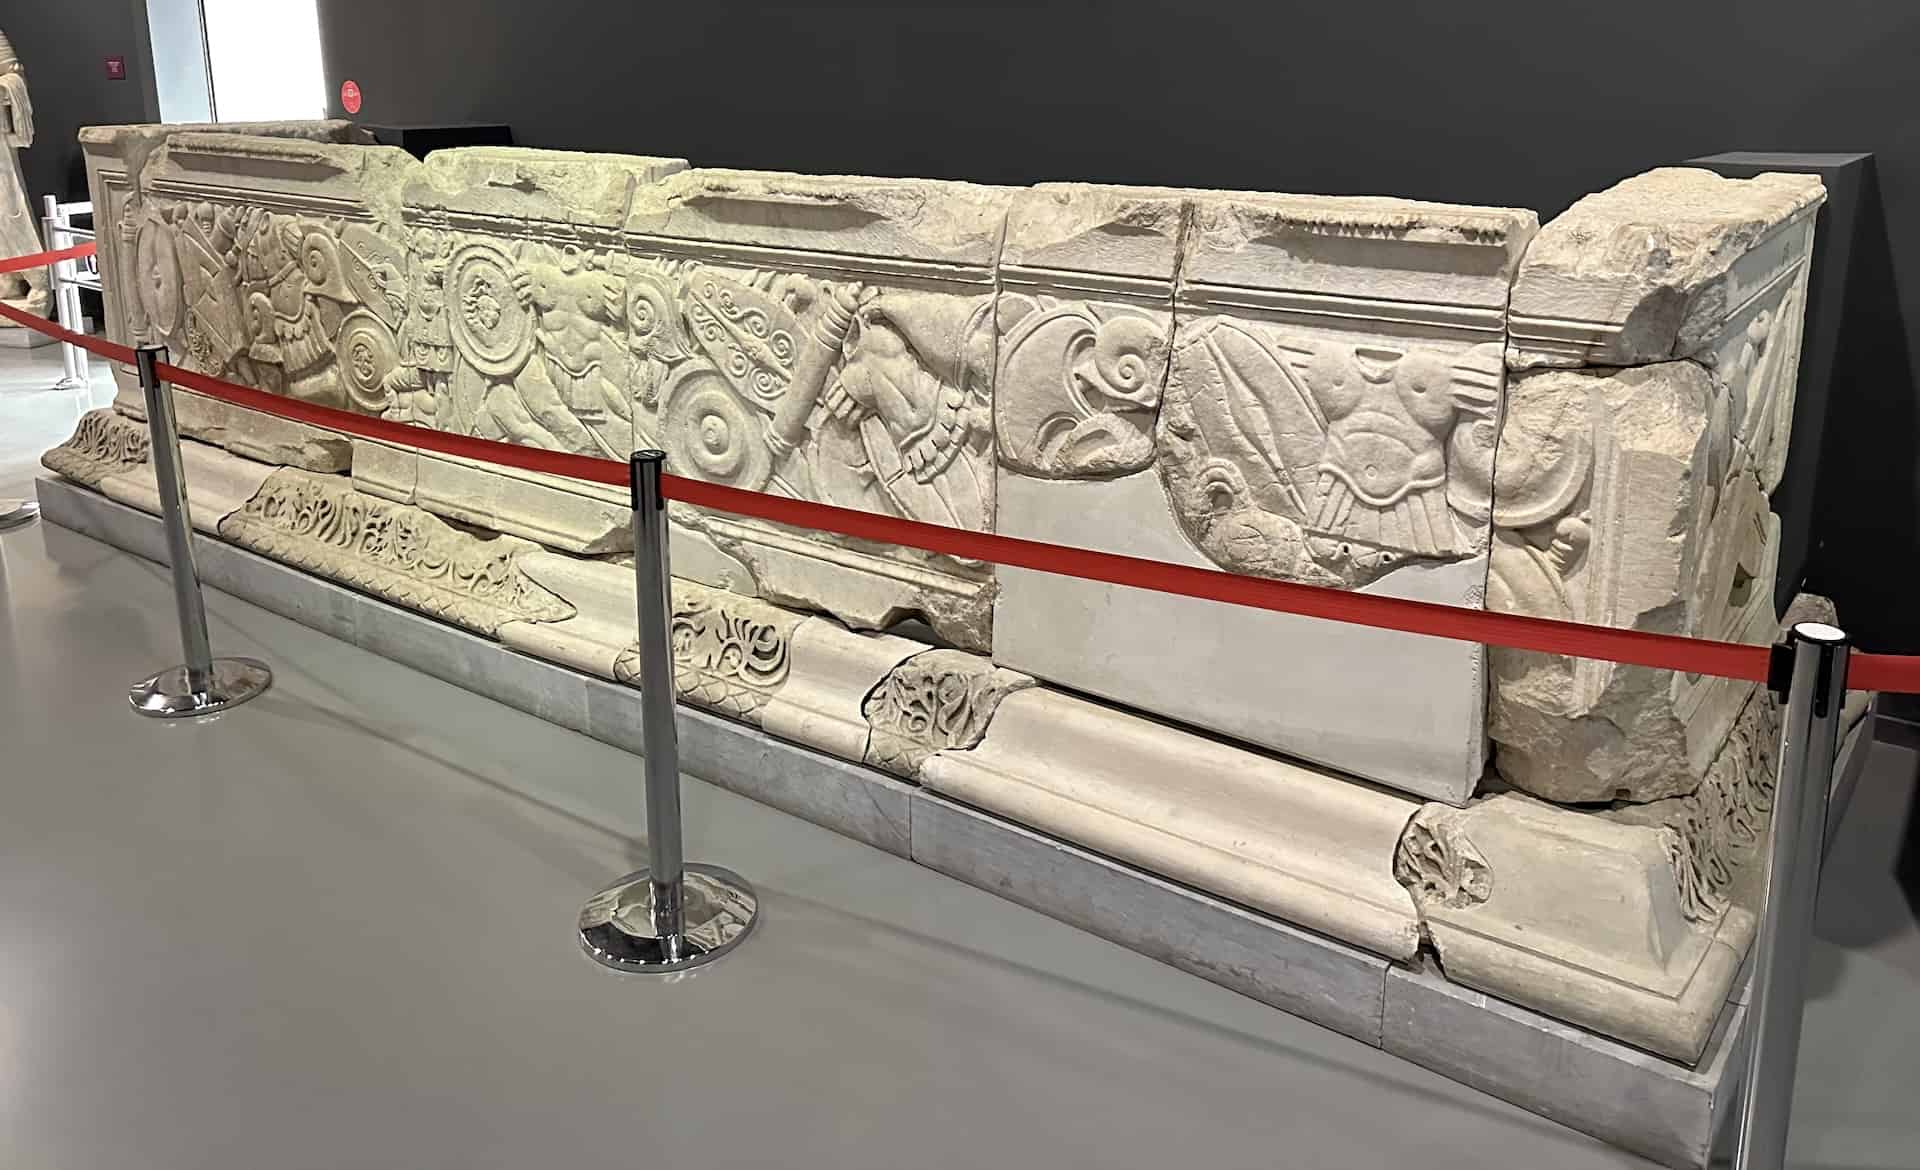 Altar of the Temple of Domitian at the Ephesus Museum in Selçuk, Turkey